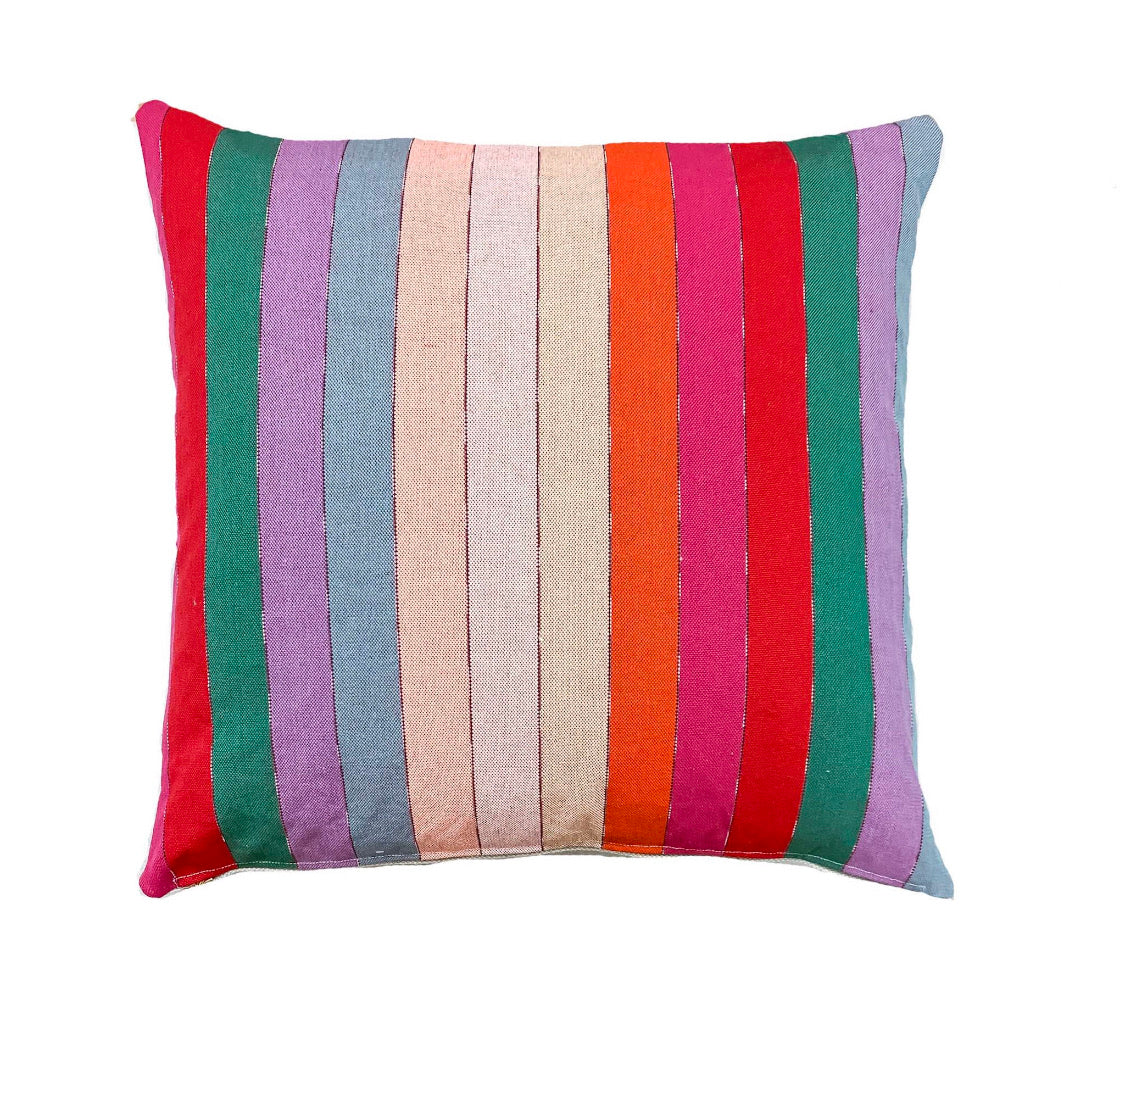 Multi-color Lucy pillow cover - Studio Pillows